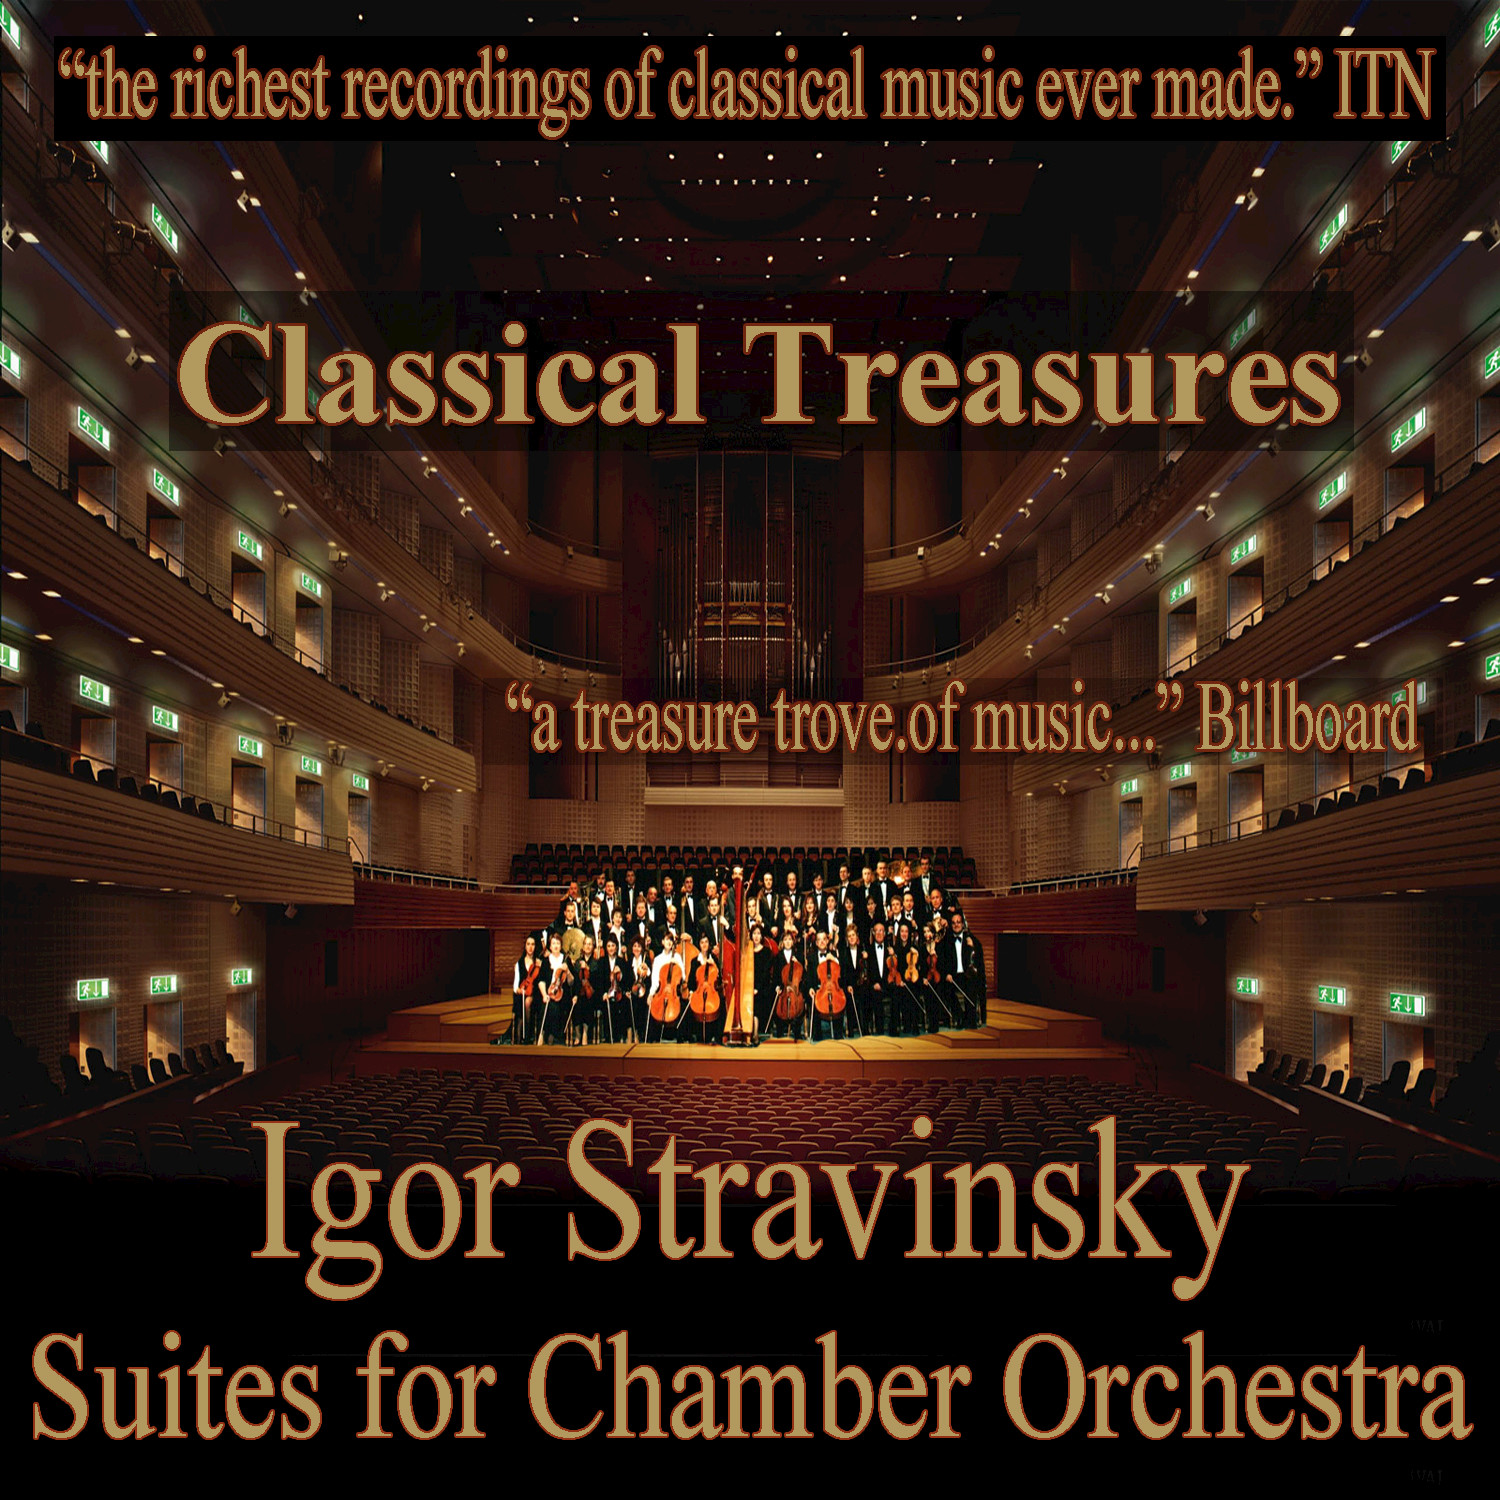 Suite No. 2 for Chamber Orchestra: II. Waltz